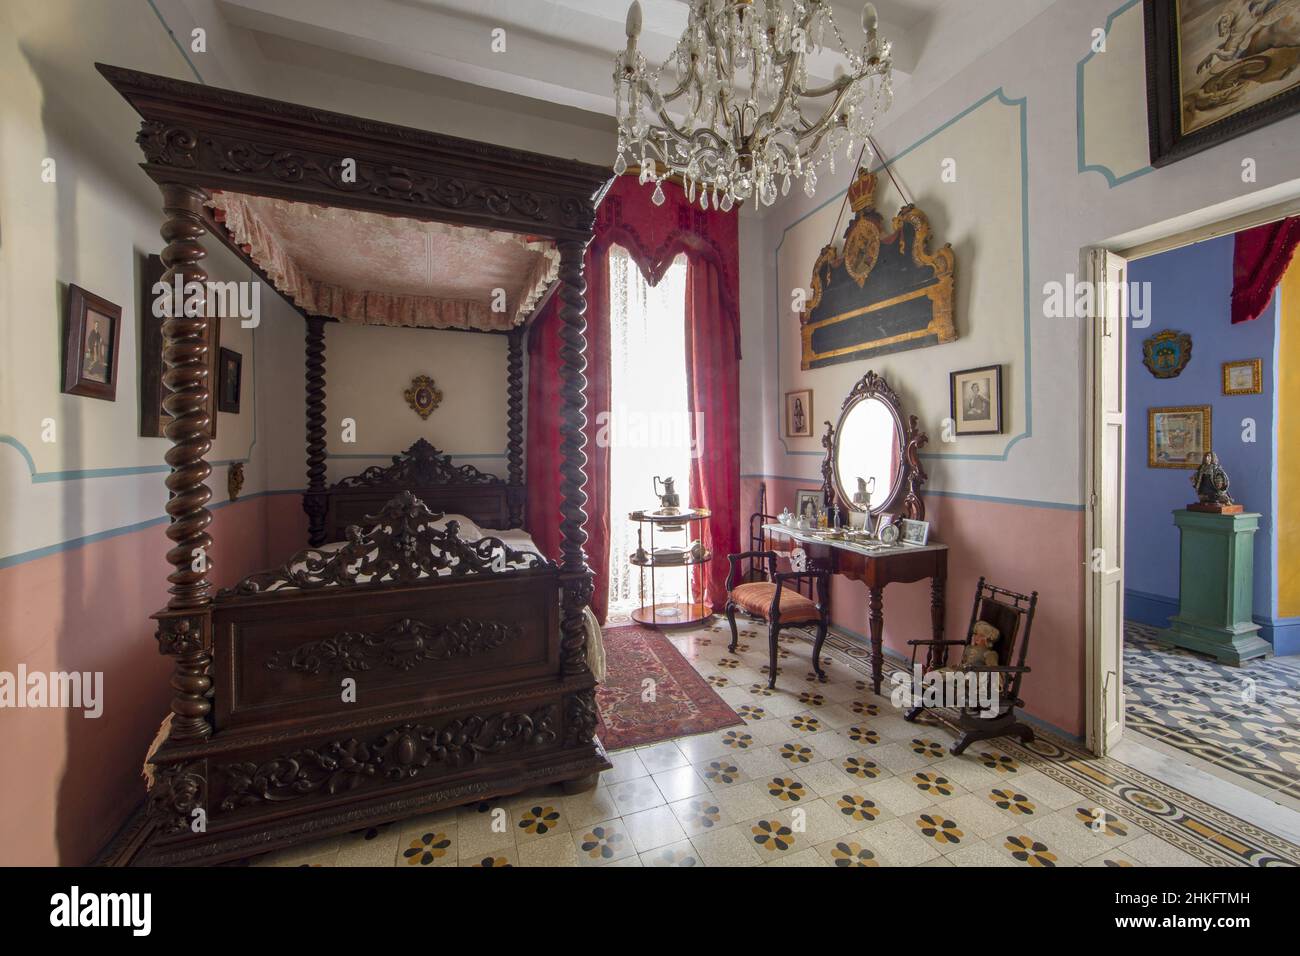 Malta, Valletta, bedroom of the Casa Rocca Piccola, a 16th century palace which houses a private museum and a bed and breakfast, decorated with a four-poster bed in woodwork, a crystal chandelier and a dining table toilet with mirror Stock Photo